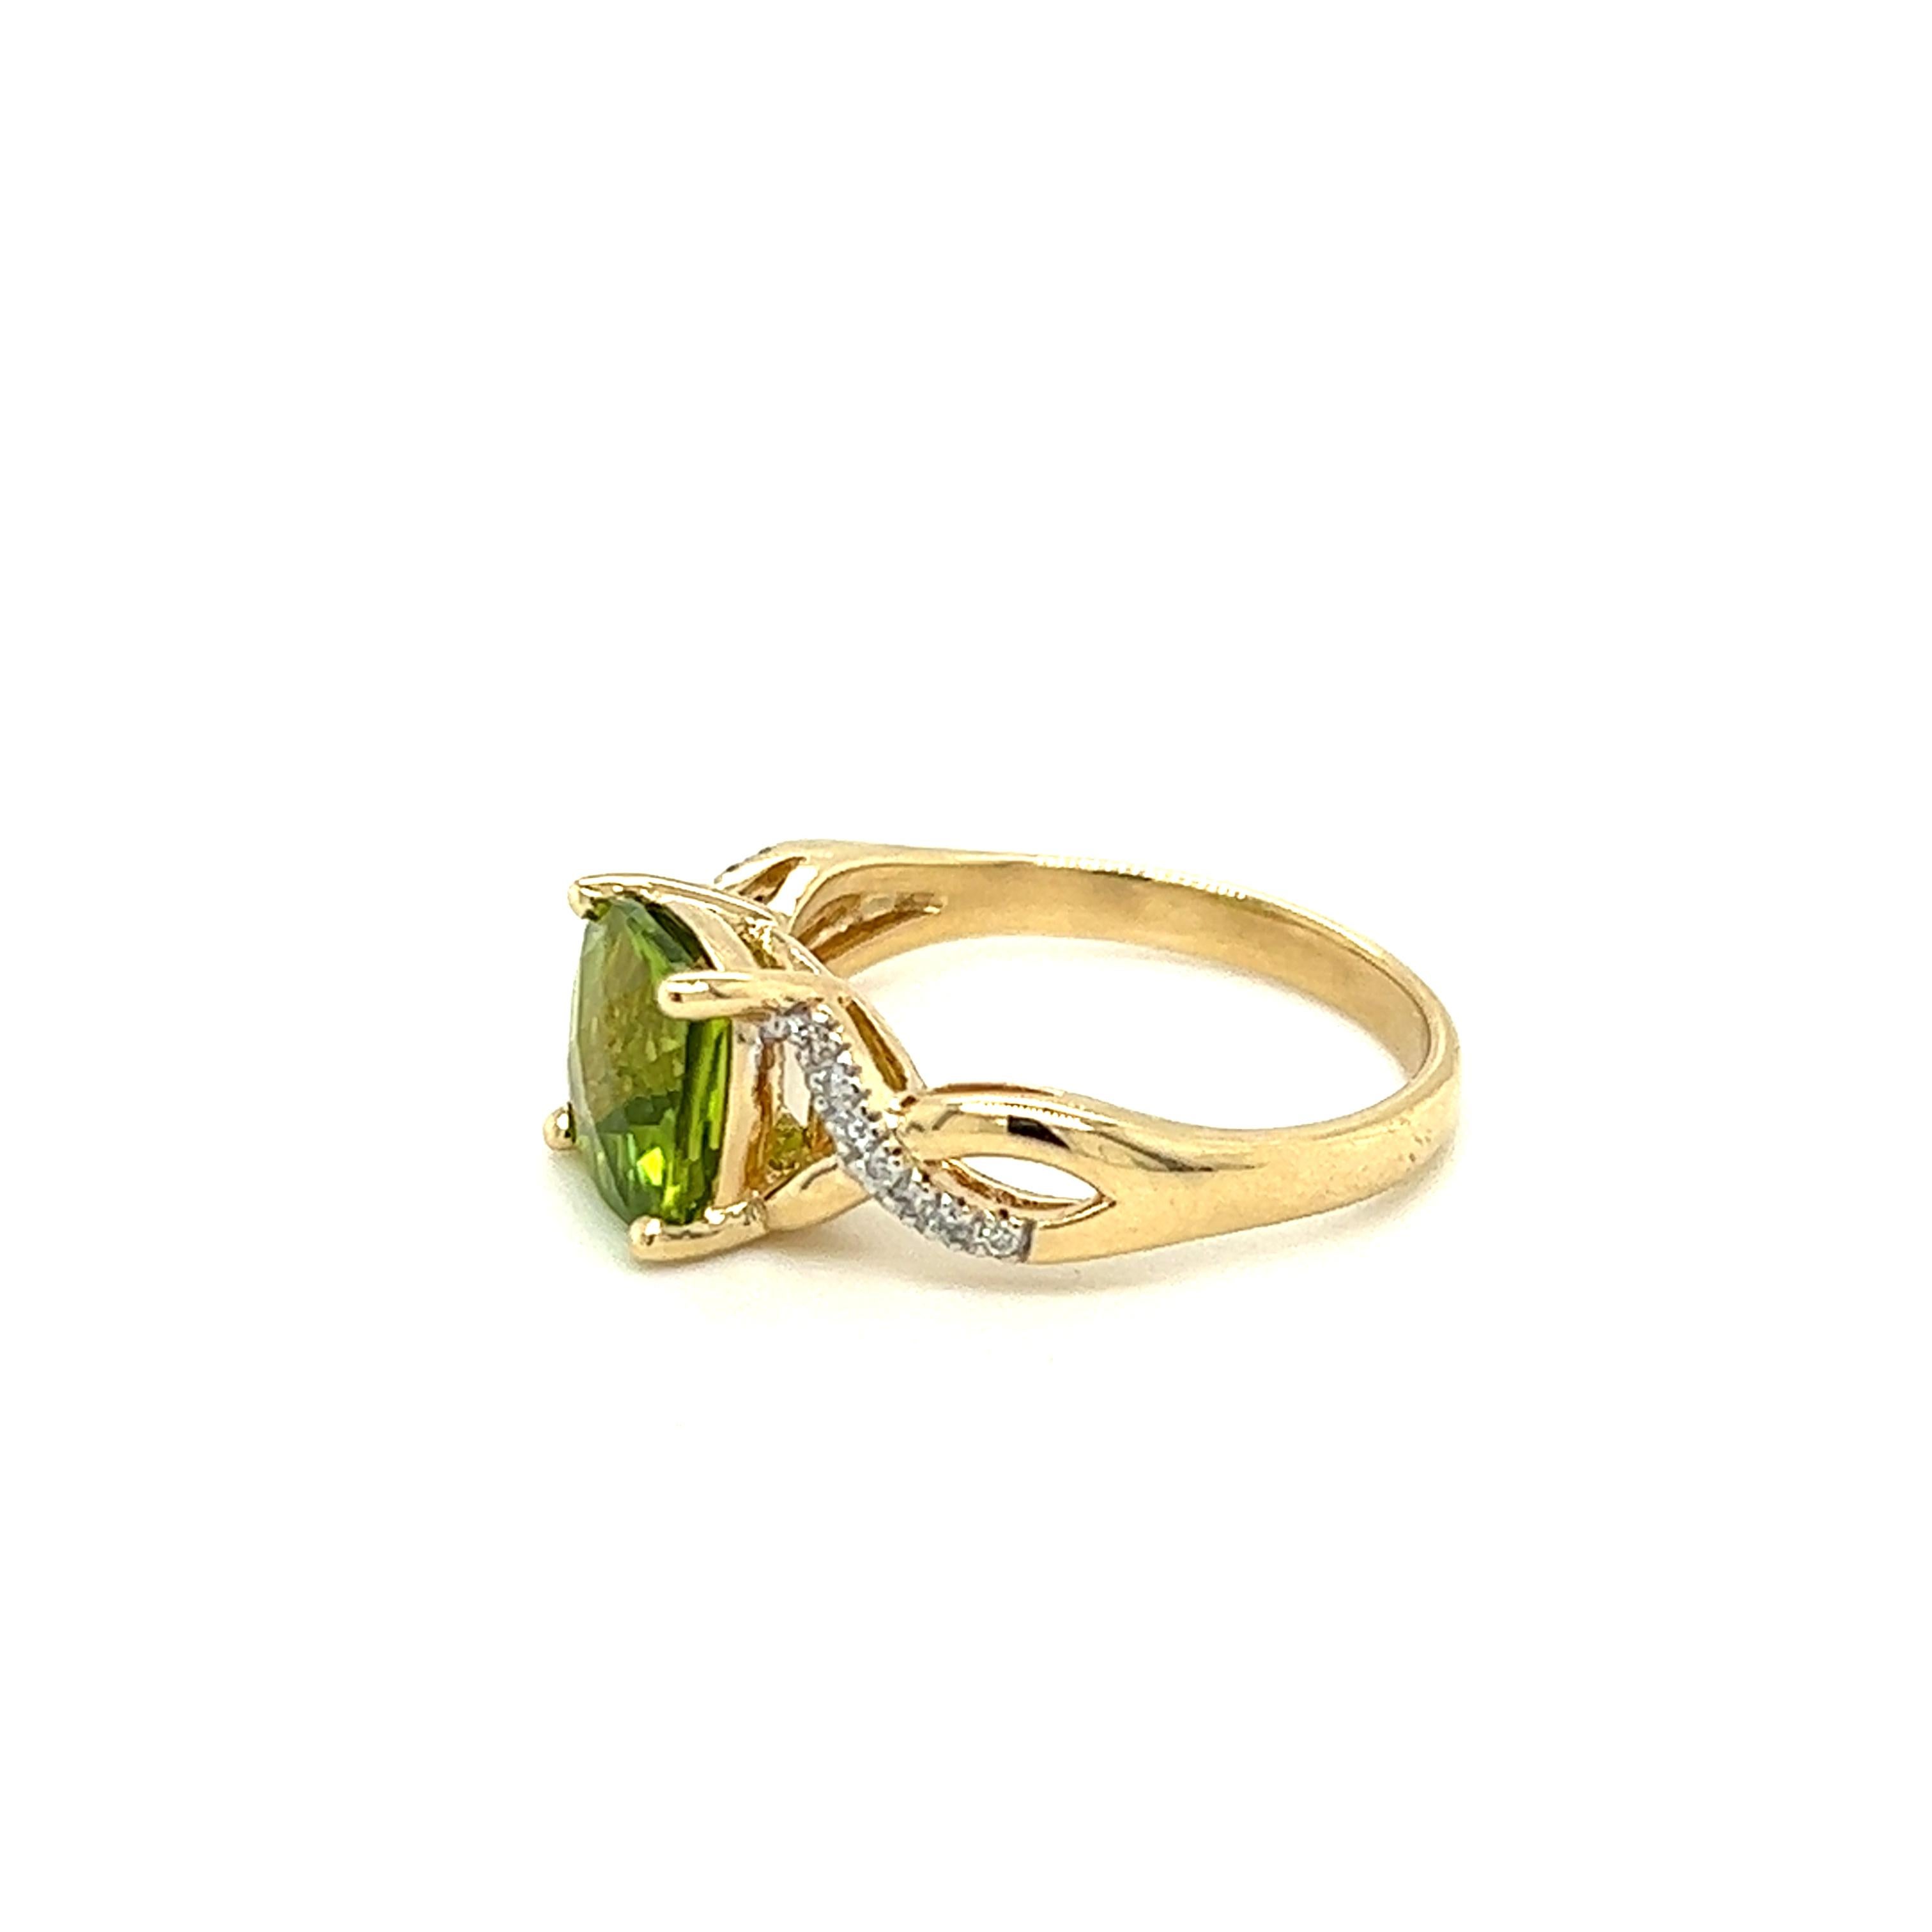 Contemporary Peridot and Diamond Ring in 14k Yellow Gold